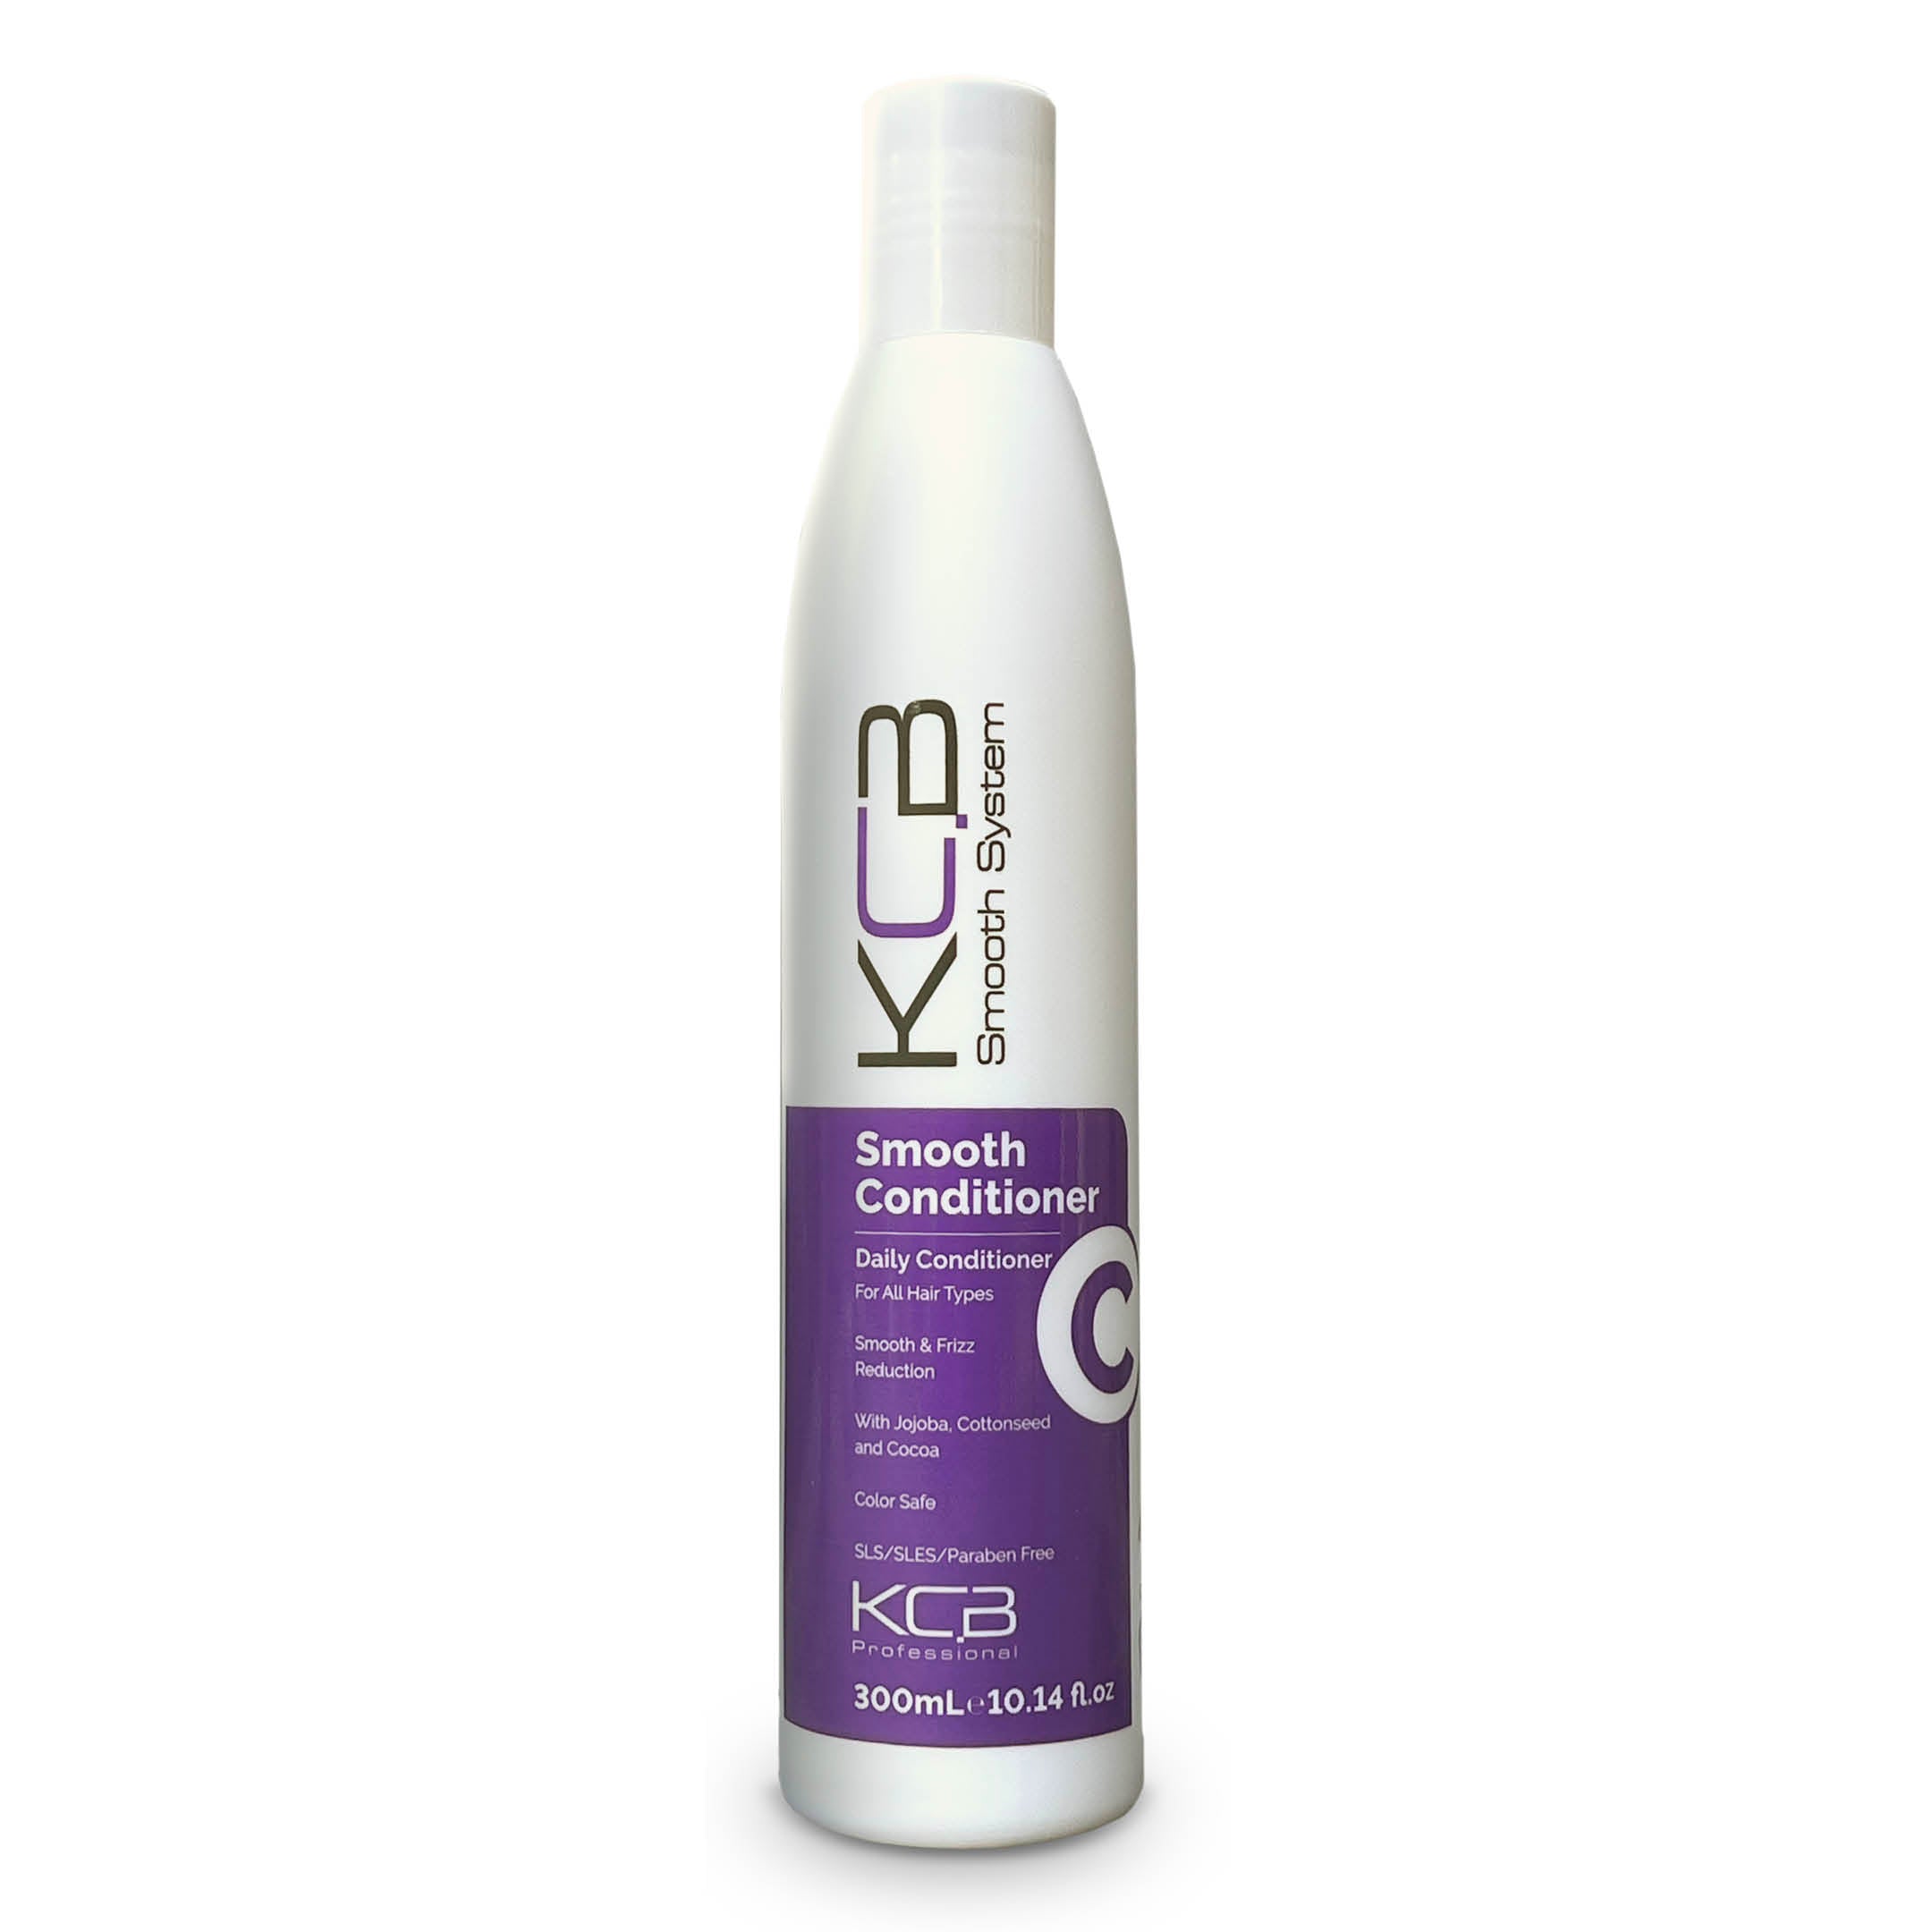 KCB Professional Smooth Conditioner for Smoothing and Hair Frizz Control. Nourishes, Revitalizes, Detangle, All Hair Types, 10.14 Fl oz / 300ml. Enriched with Jojoba Oil, Coconut and Cocoa Butter.